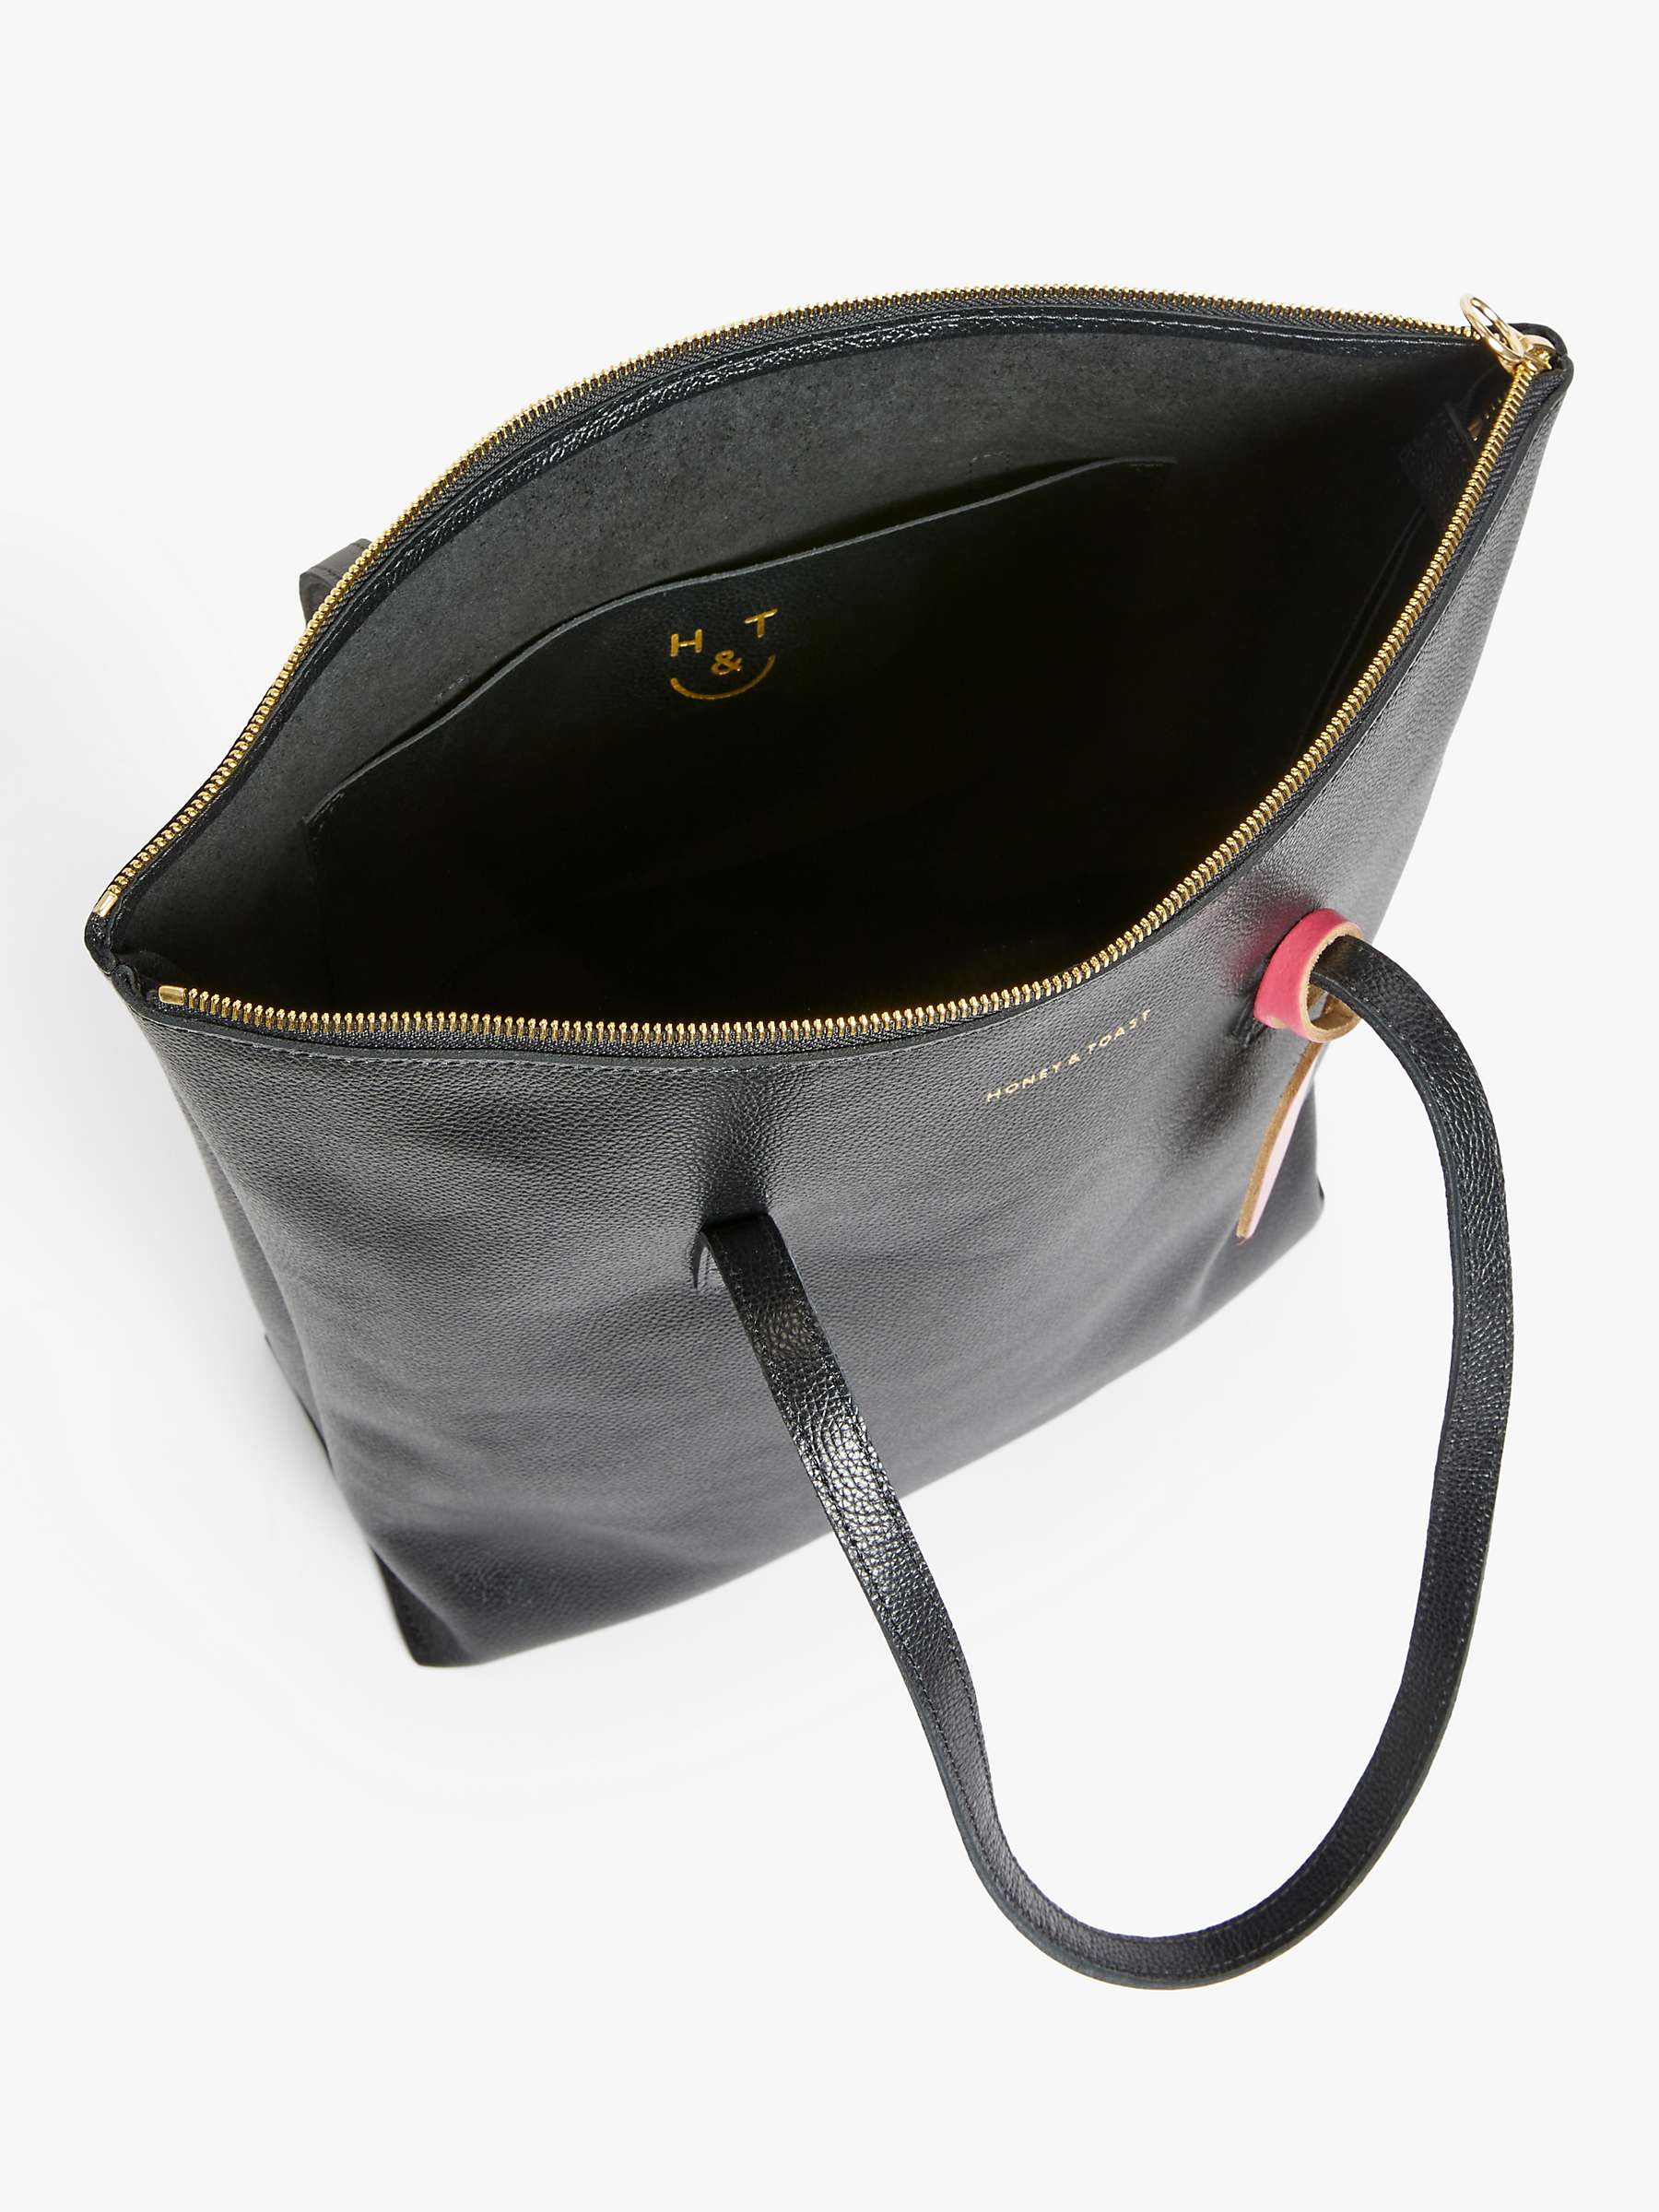 Buy Honey & Toast Gracie Leather Tote Bag Online at johnlewis.com